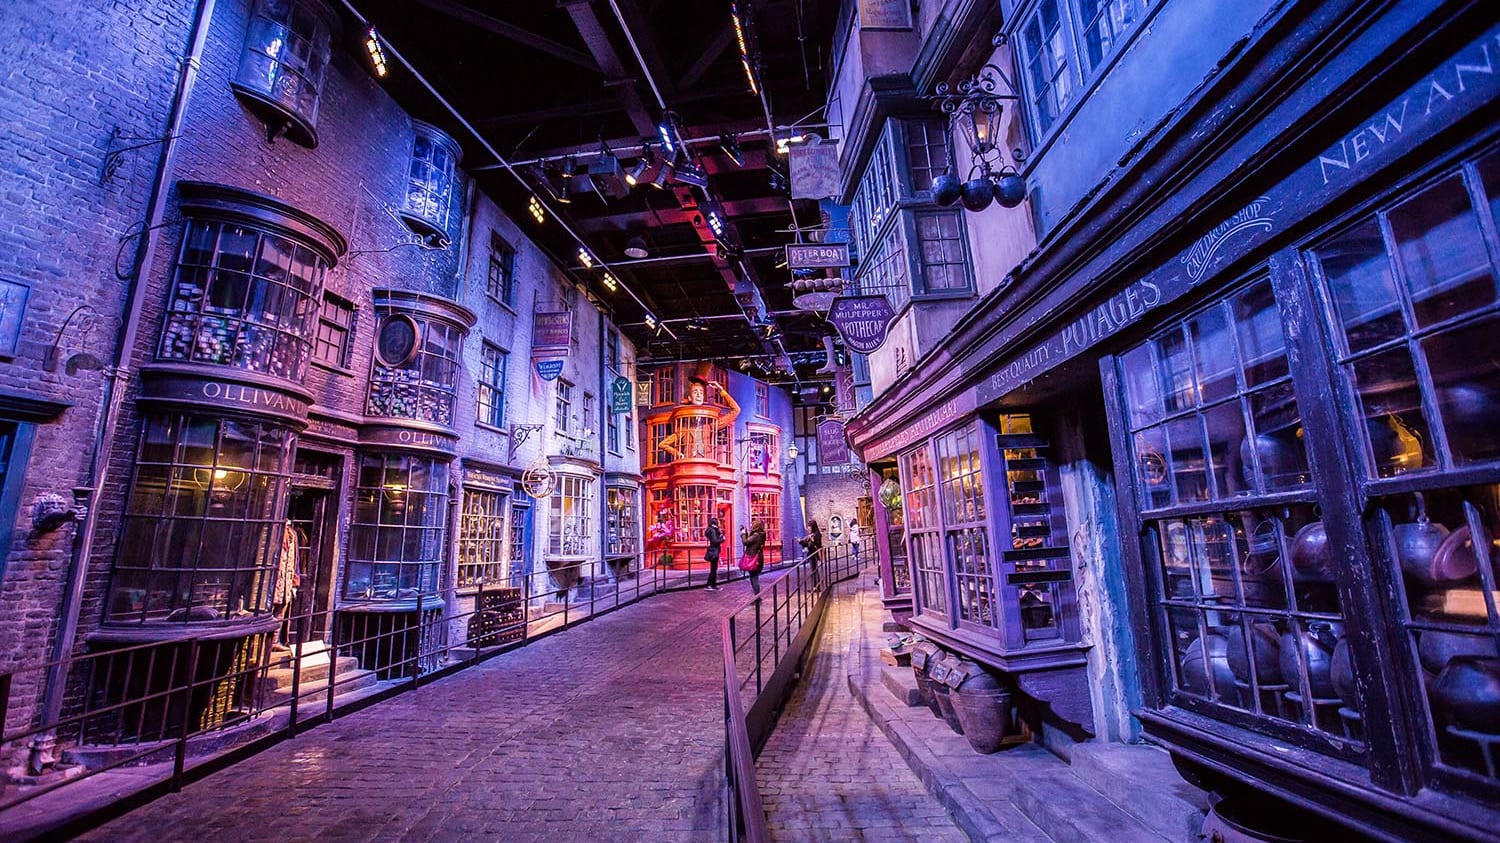 How to Plan the Perfect Harry Potter London Vacation